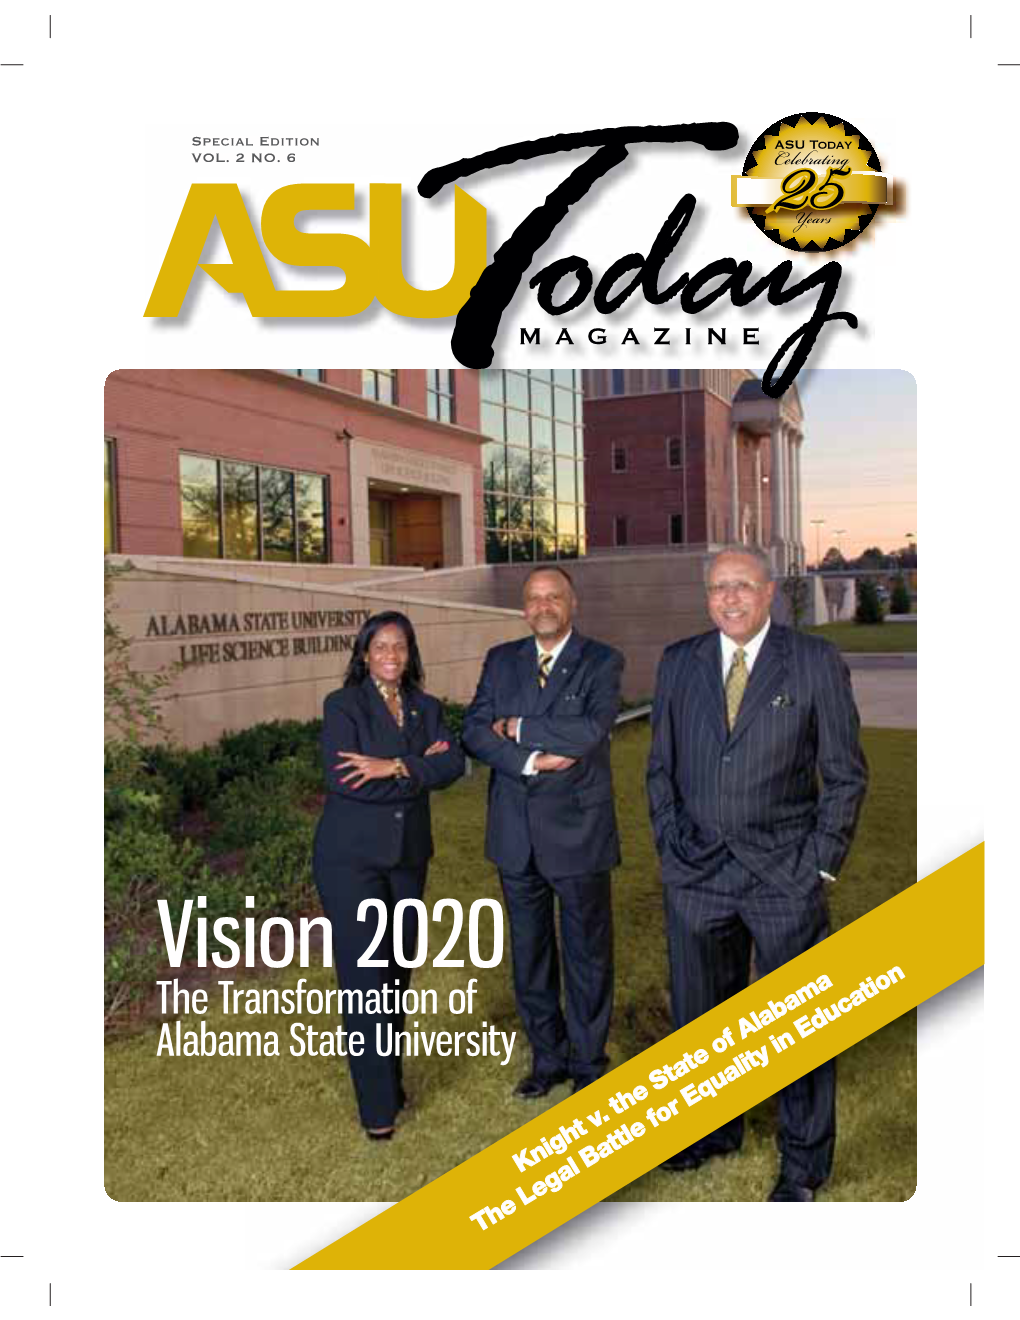 Vision 2020 the Transformation of Alabama State University